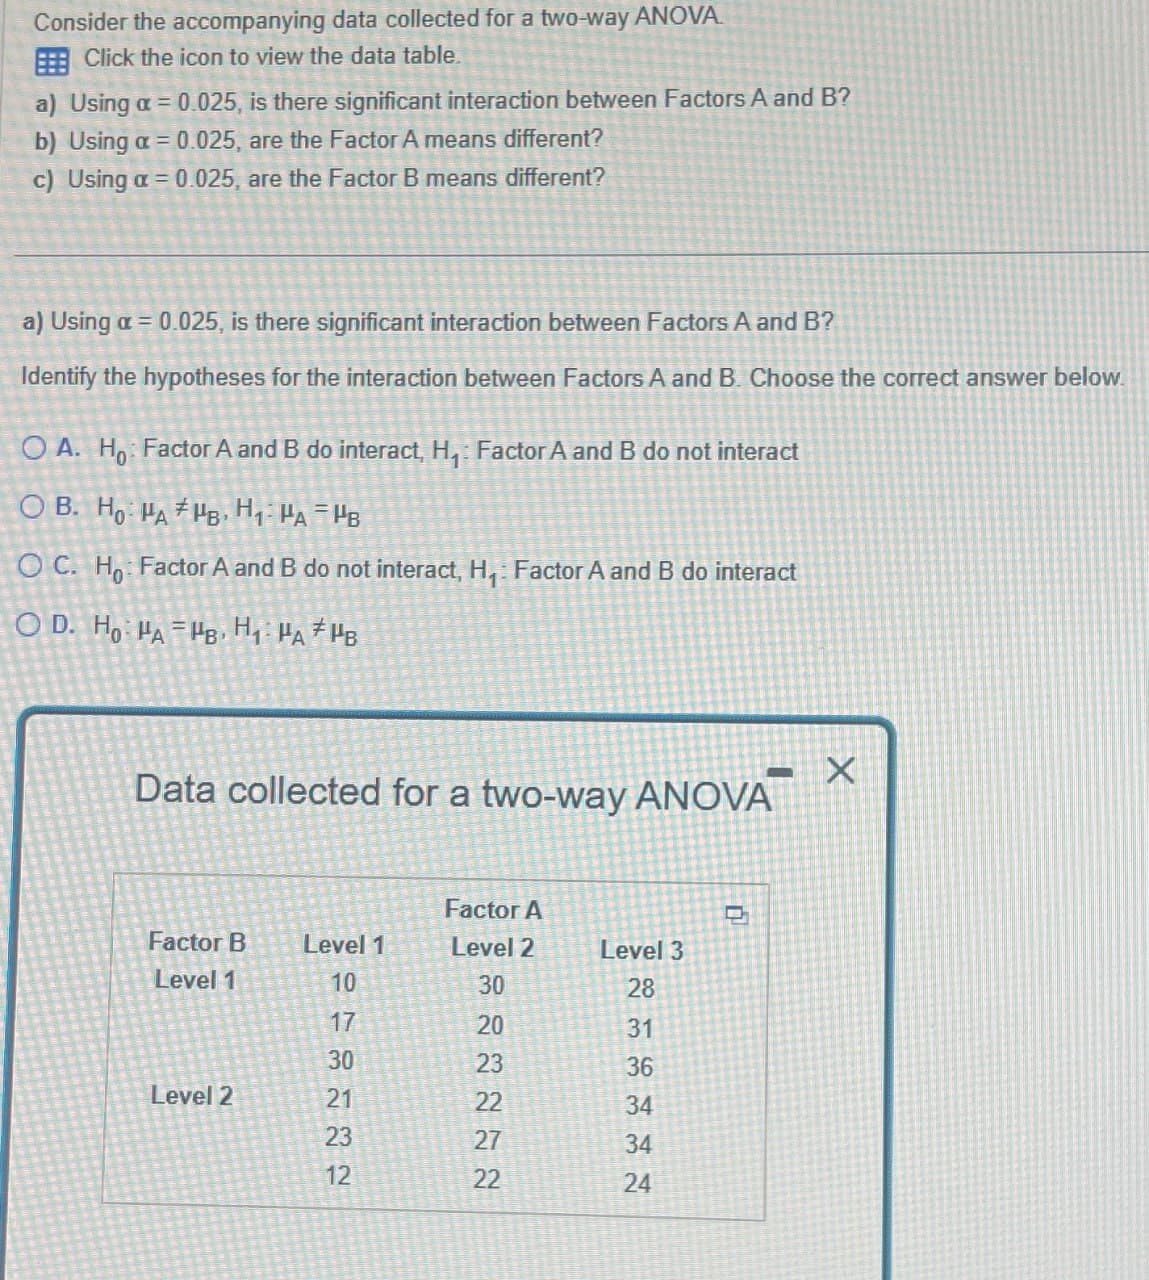 Consider the accompanying data collected for a two-way ANOVA.
Click the icon to view the data table.
a) Using a = 0.025, is there significant interaction between Factors A and B?
b) Using a 0.025, are the Factor A means different?
c) Using a
=
0.025, are the Factor B means different?
a) Using a = 0.025, is there significant interaction between Factors A and B?
Identify the hypotheses for the interaction between Factors A and B. Choose the correct answer below.
OA. Ho Factor A and B do interact, H₁: Factor A and B do not interact
OB. Ho HAB, H₁· Pa = PB
OC. Ho Factor A and B do not interact, H₁: Factor A and B do interact
OD. Ho PA HB, H₁: PA PB
Data collected for a two-way ANOVA
Factor A
Factor B
Level 1
Level 1
Level 2
Level 3
27322
10
17
30
Level 2
21
34
23
27
34
12
24
322222
30
20
232
28
31
36
X